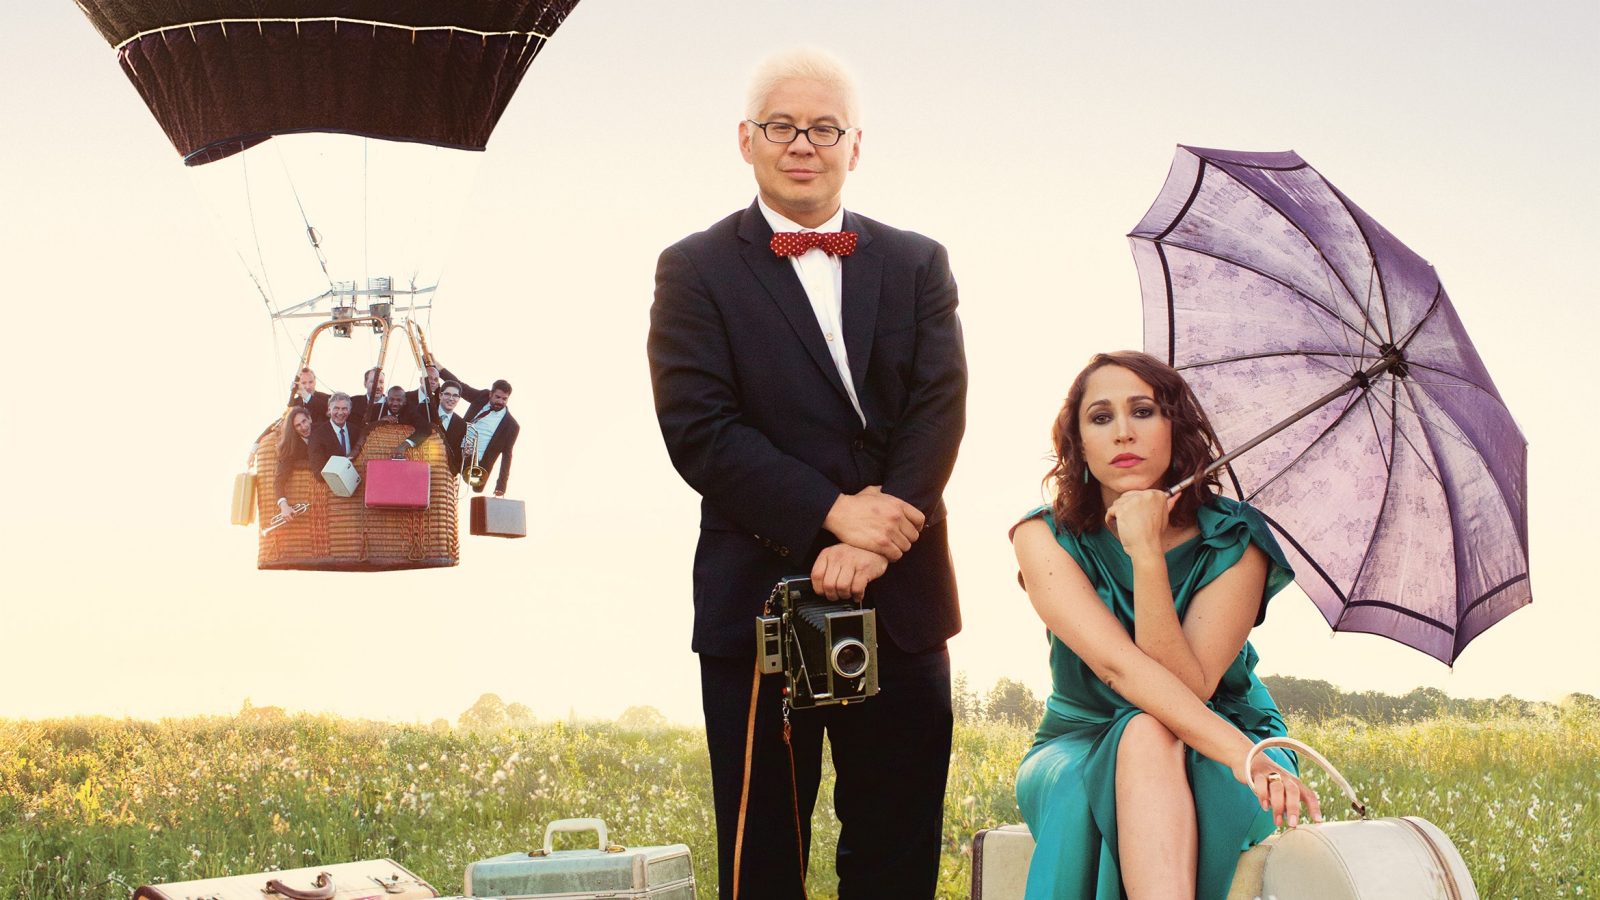  In the foreground, Thomas Lauderdale of Pink Martini, standing and holding a vintage camera, and China Forbes of Pink Martini, seated on and near vintage suitcases and holding a navy blue umbrella, while others float in a hot air balloon in the background